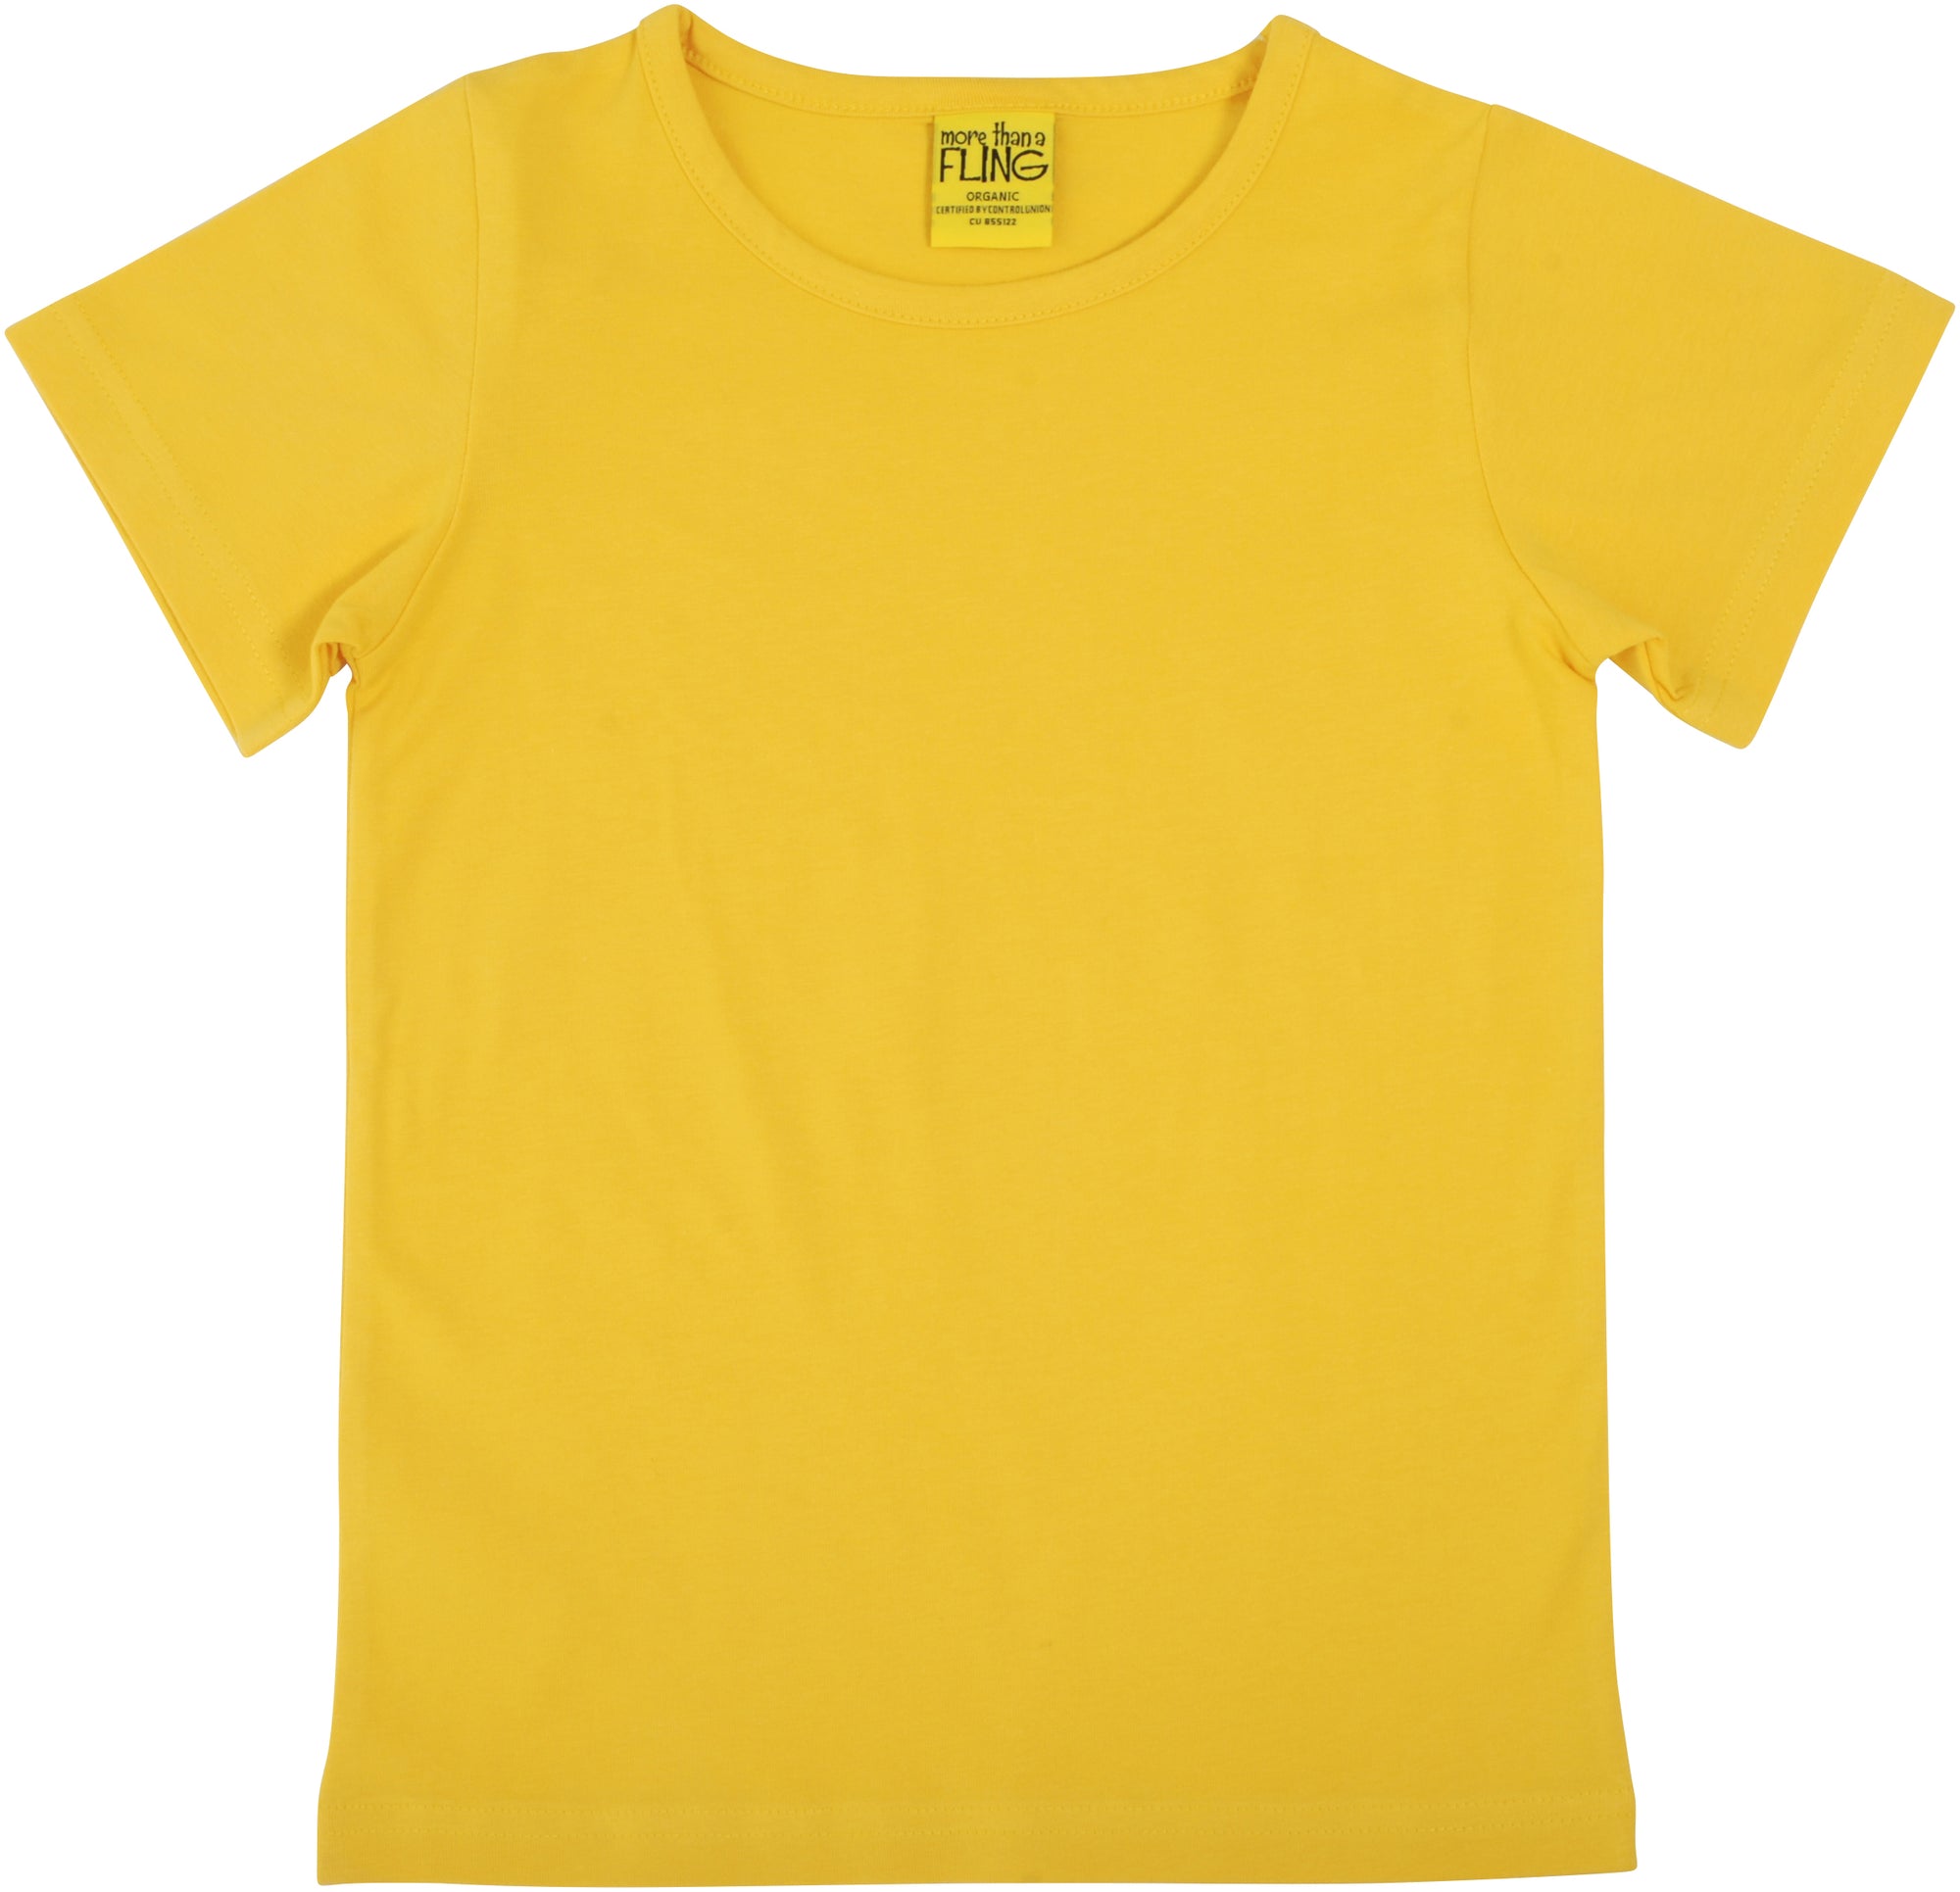 More Than A Fling ADULT - T-Shirt Warm Yellow